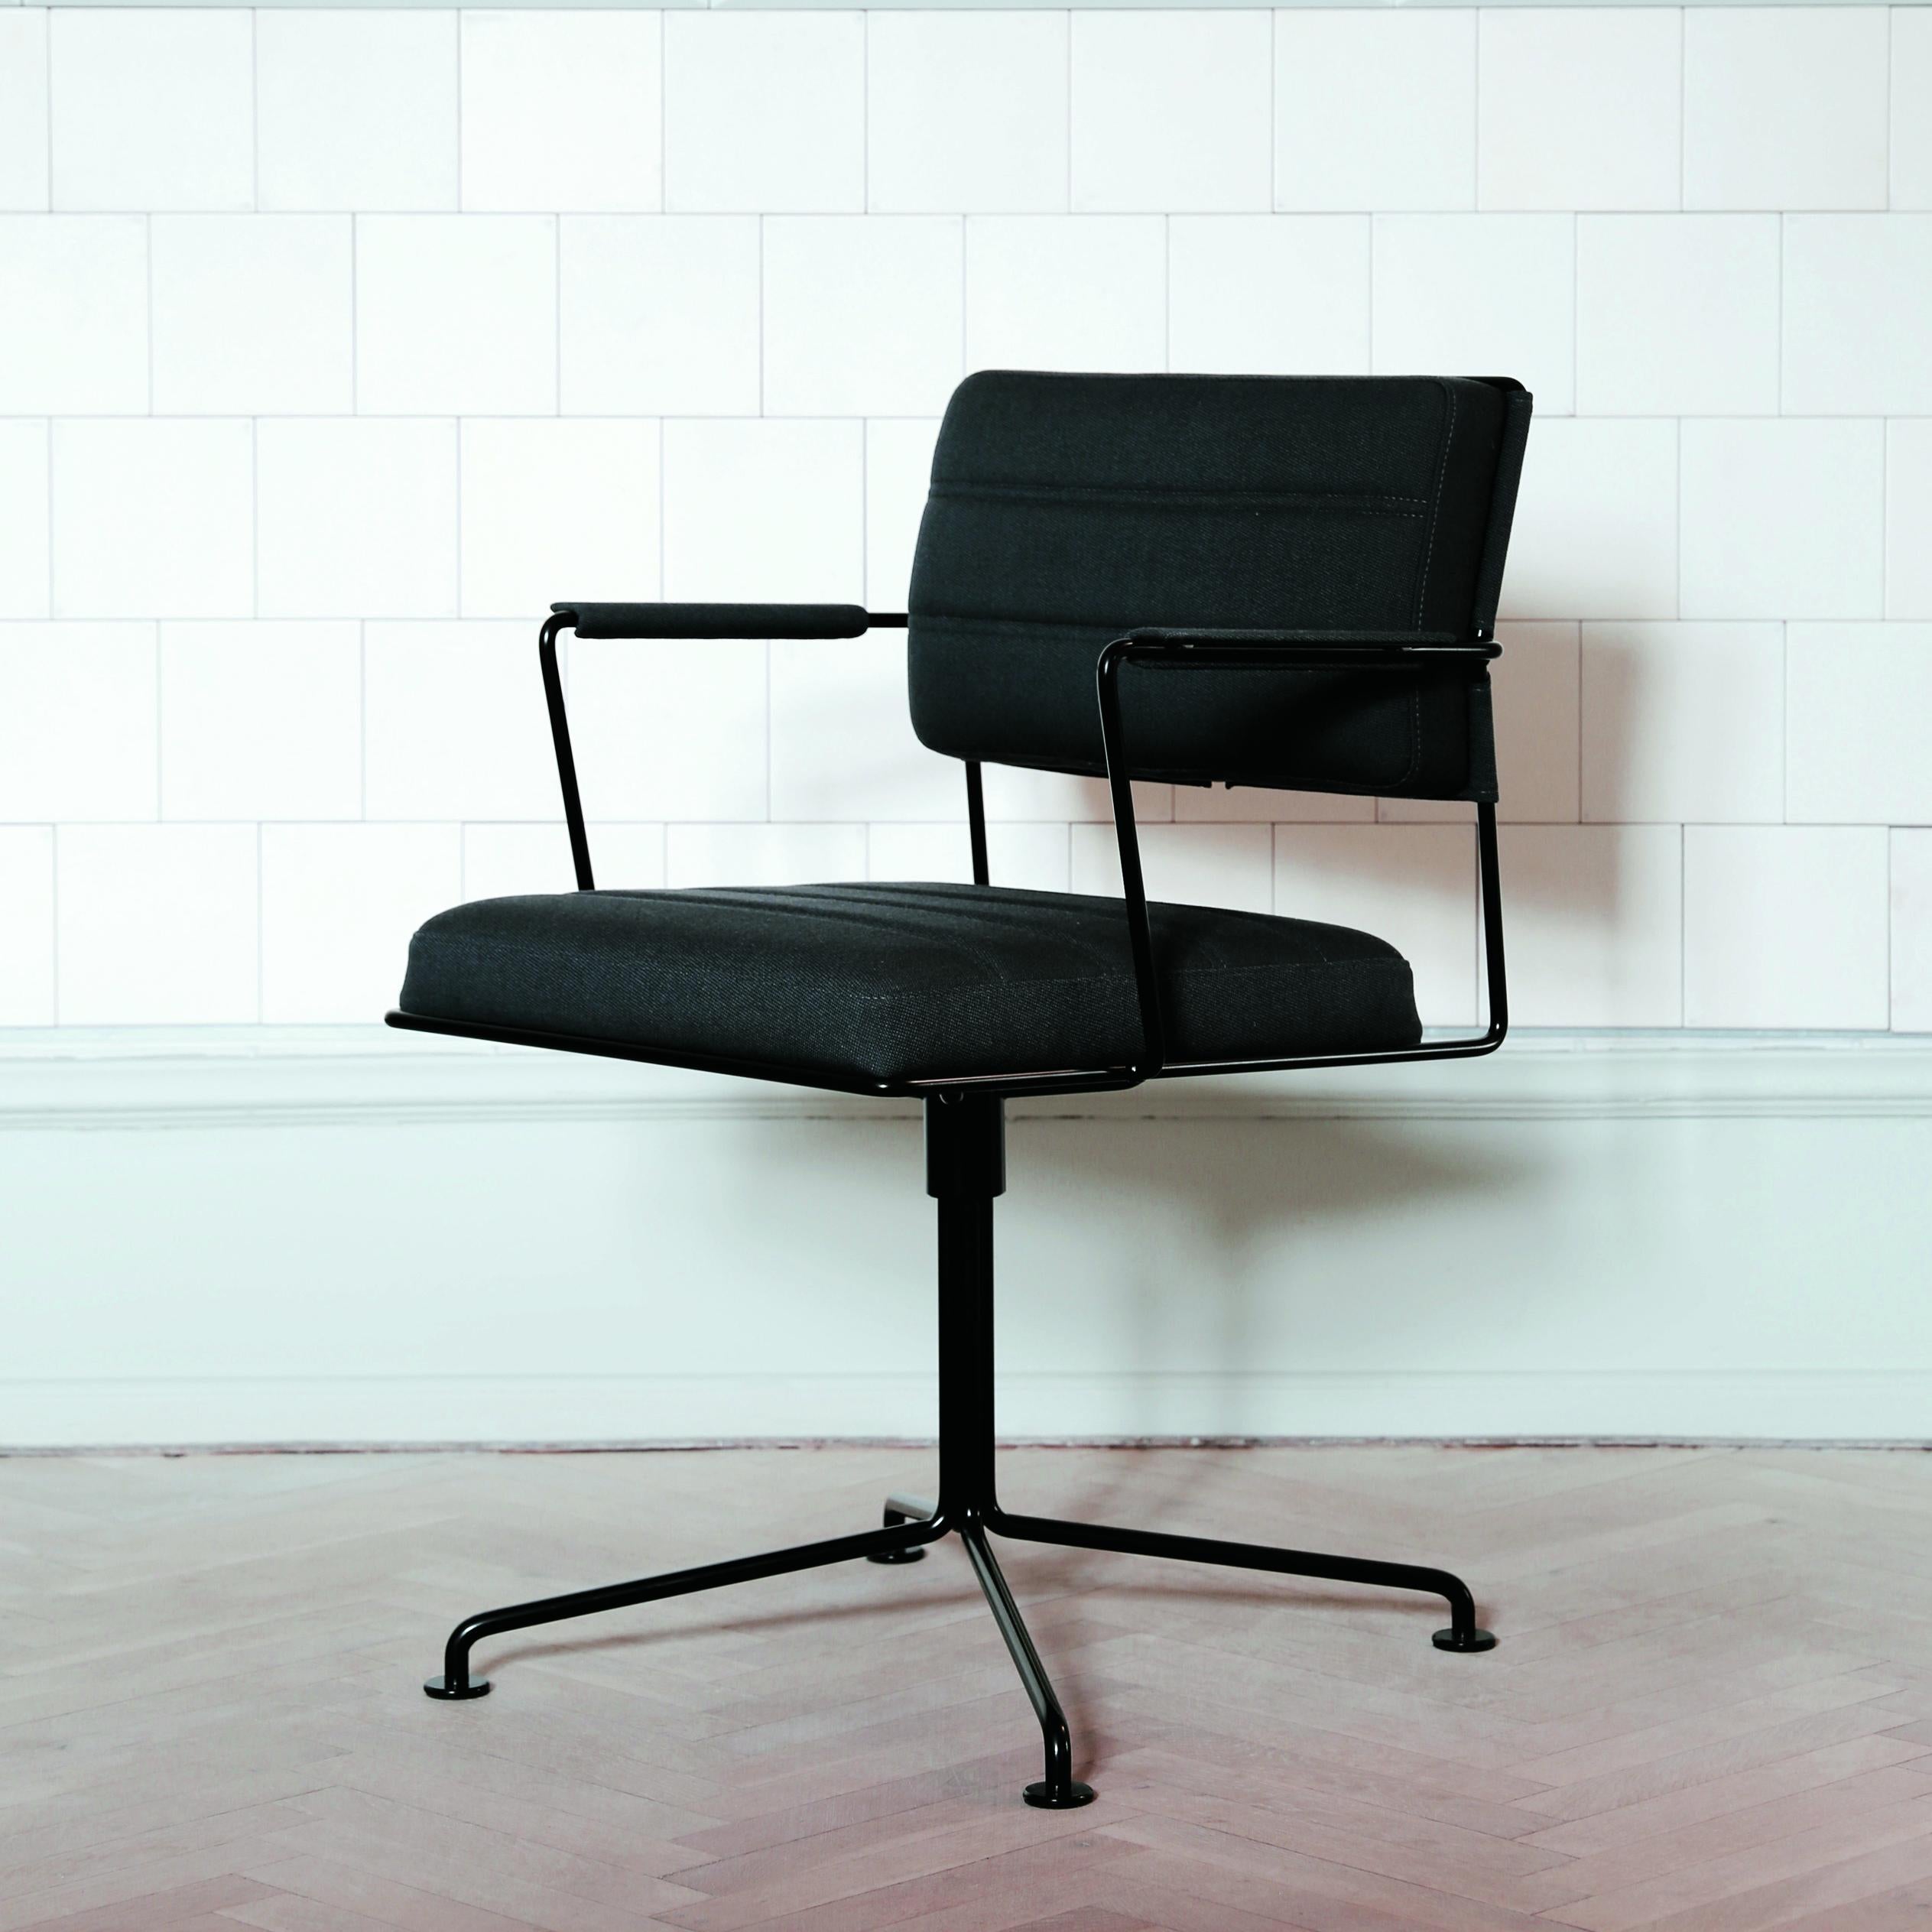 Contemporary Henrik Tengler, HT 2012 Black Upholstery Time Chair by One Collection